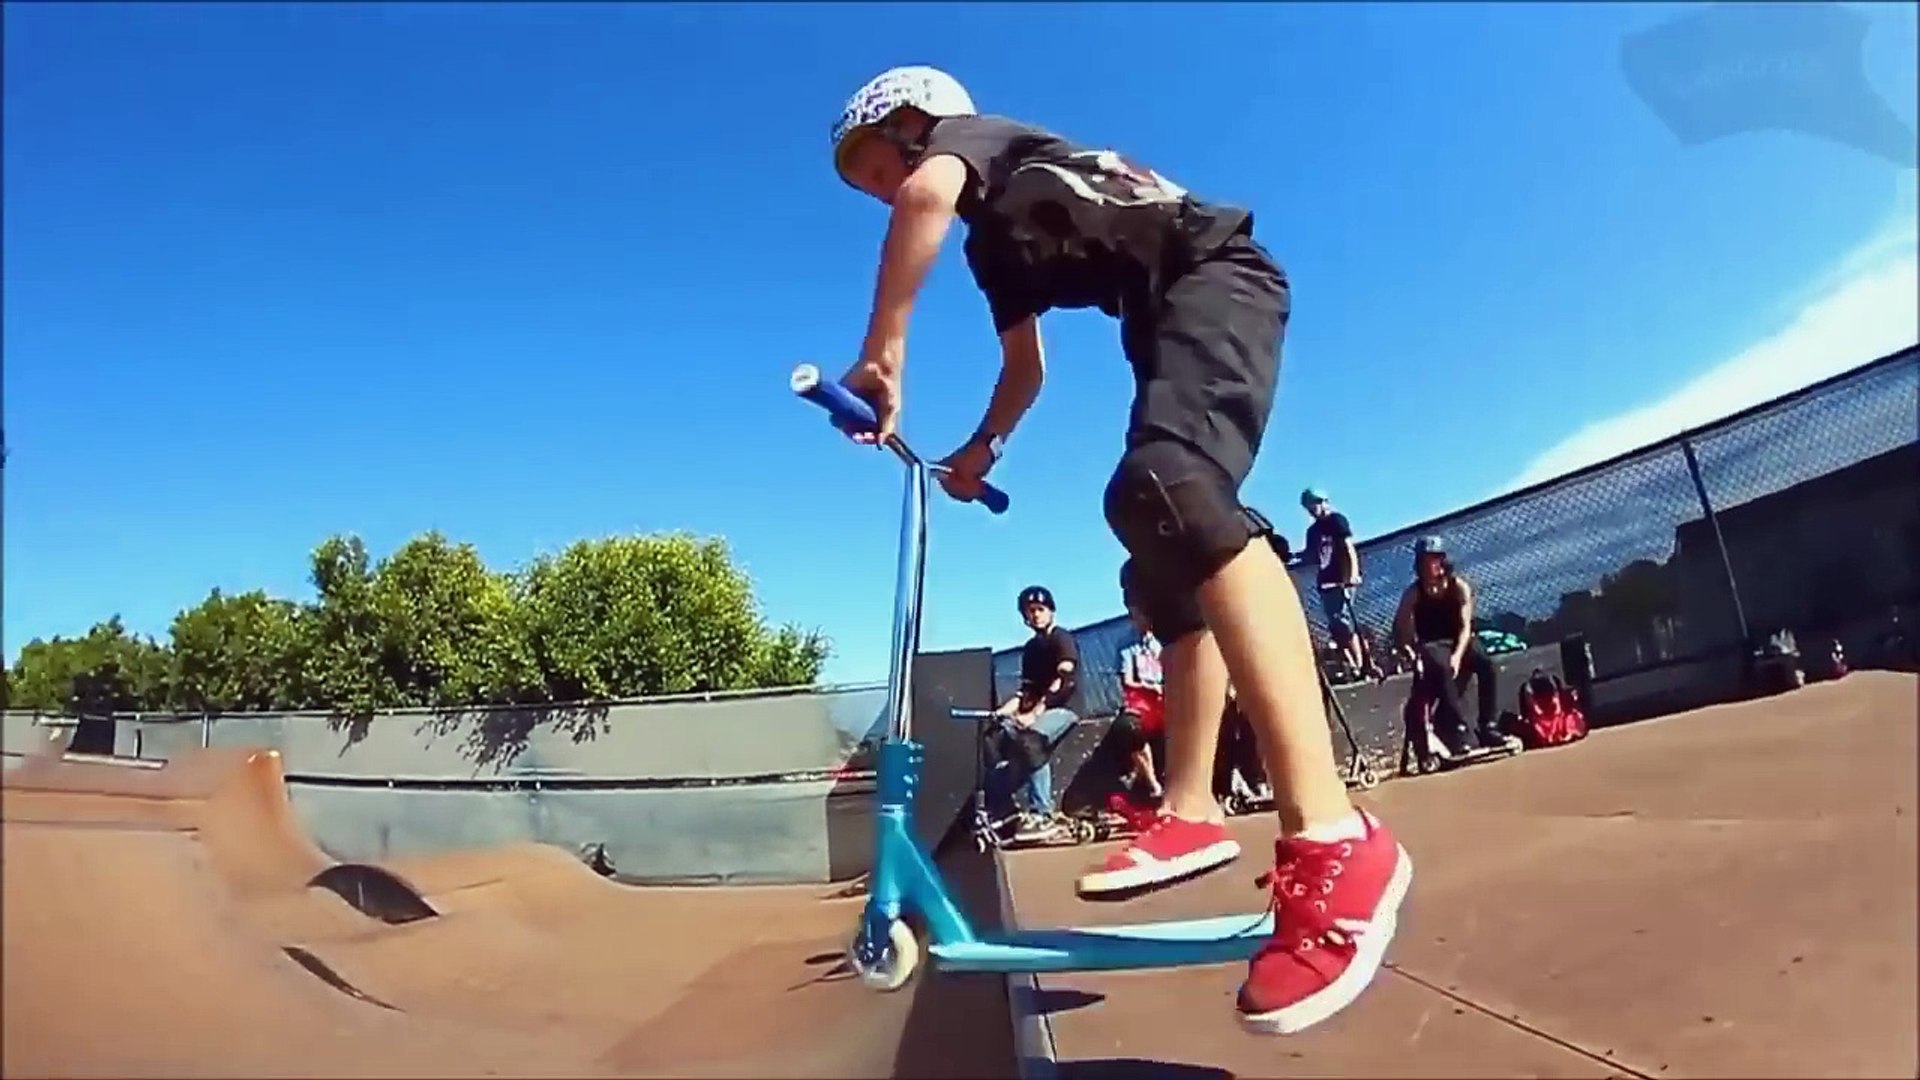 Tanner Fox Scooter Tricks Compilation - 2017 Edit - video Dailymotion